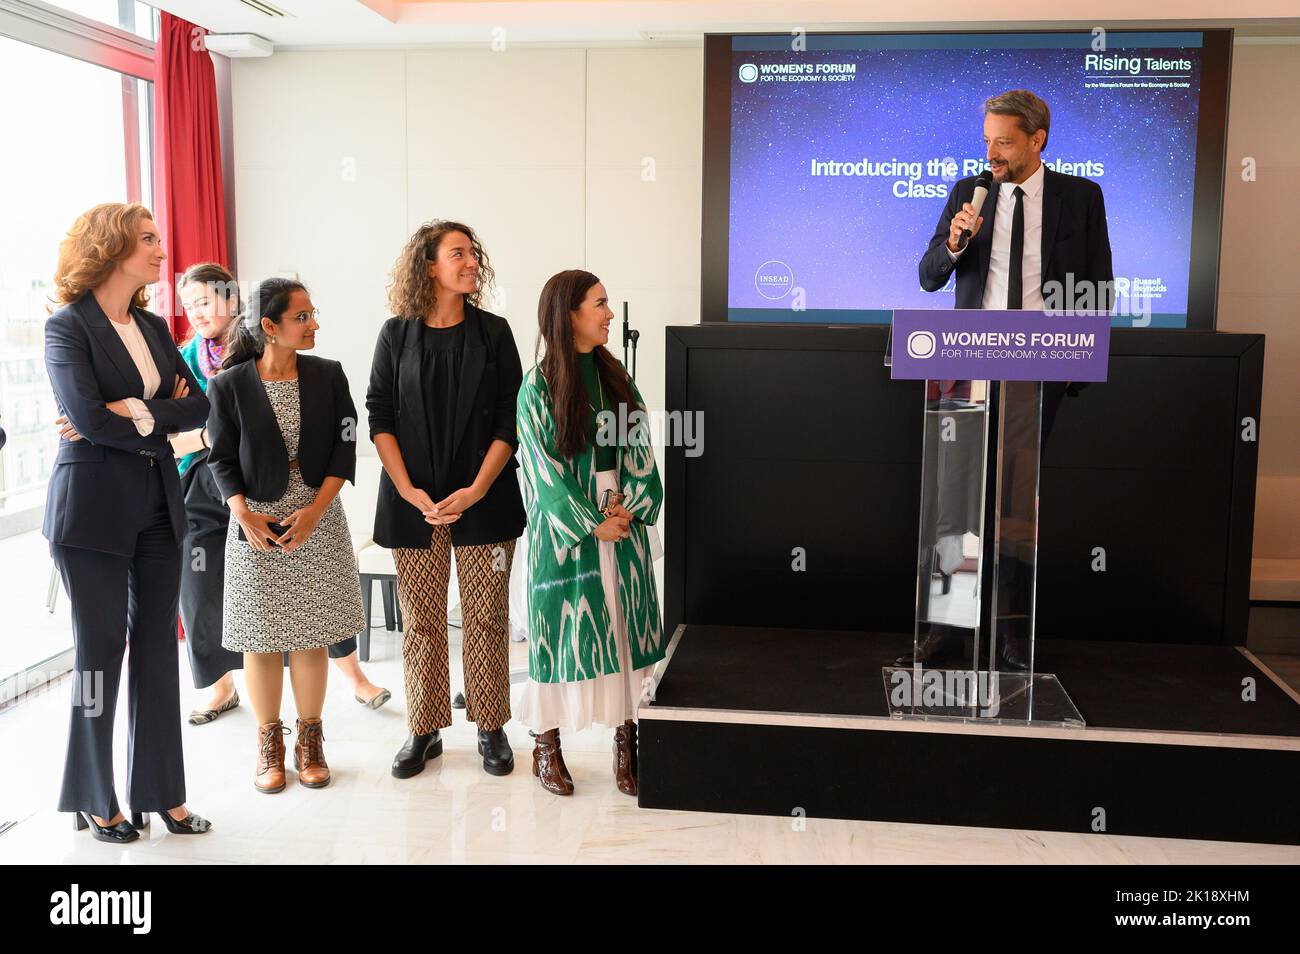 Souad Boutegrabet, CEO of Des Codeuses, Anne-Gabrielle Heilbronner, General Secretary of Publicis Groupe, Christel Heydemann, CEO of Orange, Fatimah Hossaini, Afghan artist and activist, Mastooraat , Jean-Marie Girodolle, Nupur Kohli, Dutch Founder and Director of NIIS Healthcare and Anne-Laure de Chammard, CEO of Energy Solutions International, ENGIE, at the Women's Forum Rising Talents event in Paris, France on September 16, 2022. Photo by Laurent Zabulon/ABACAPRESS.COM Stock Photo